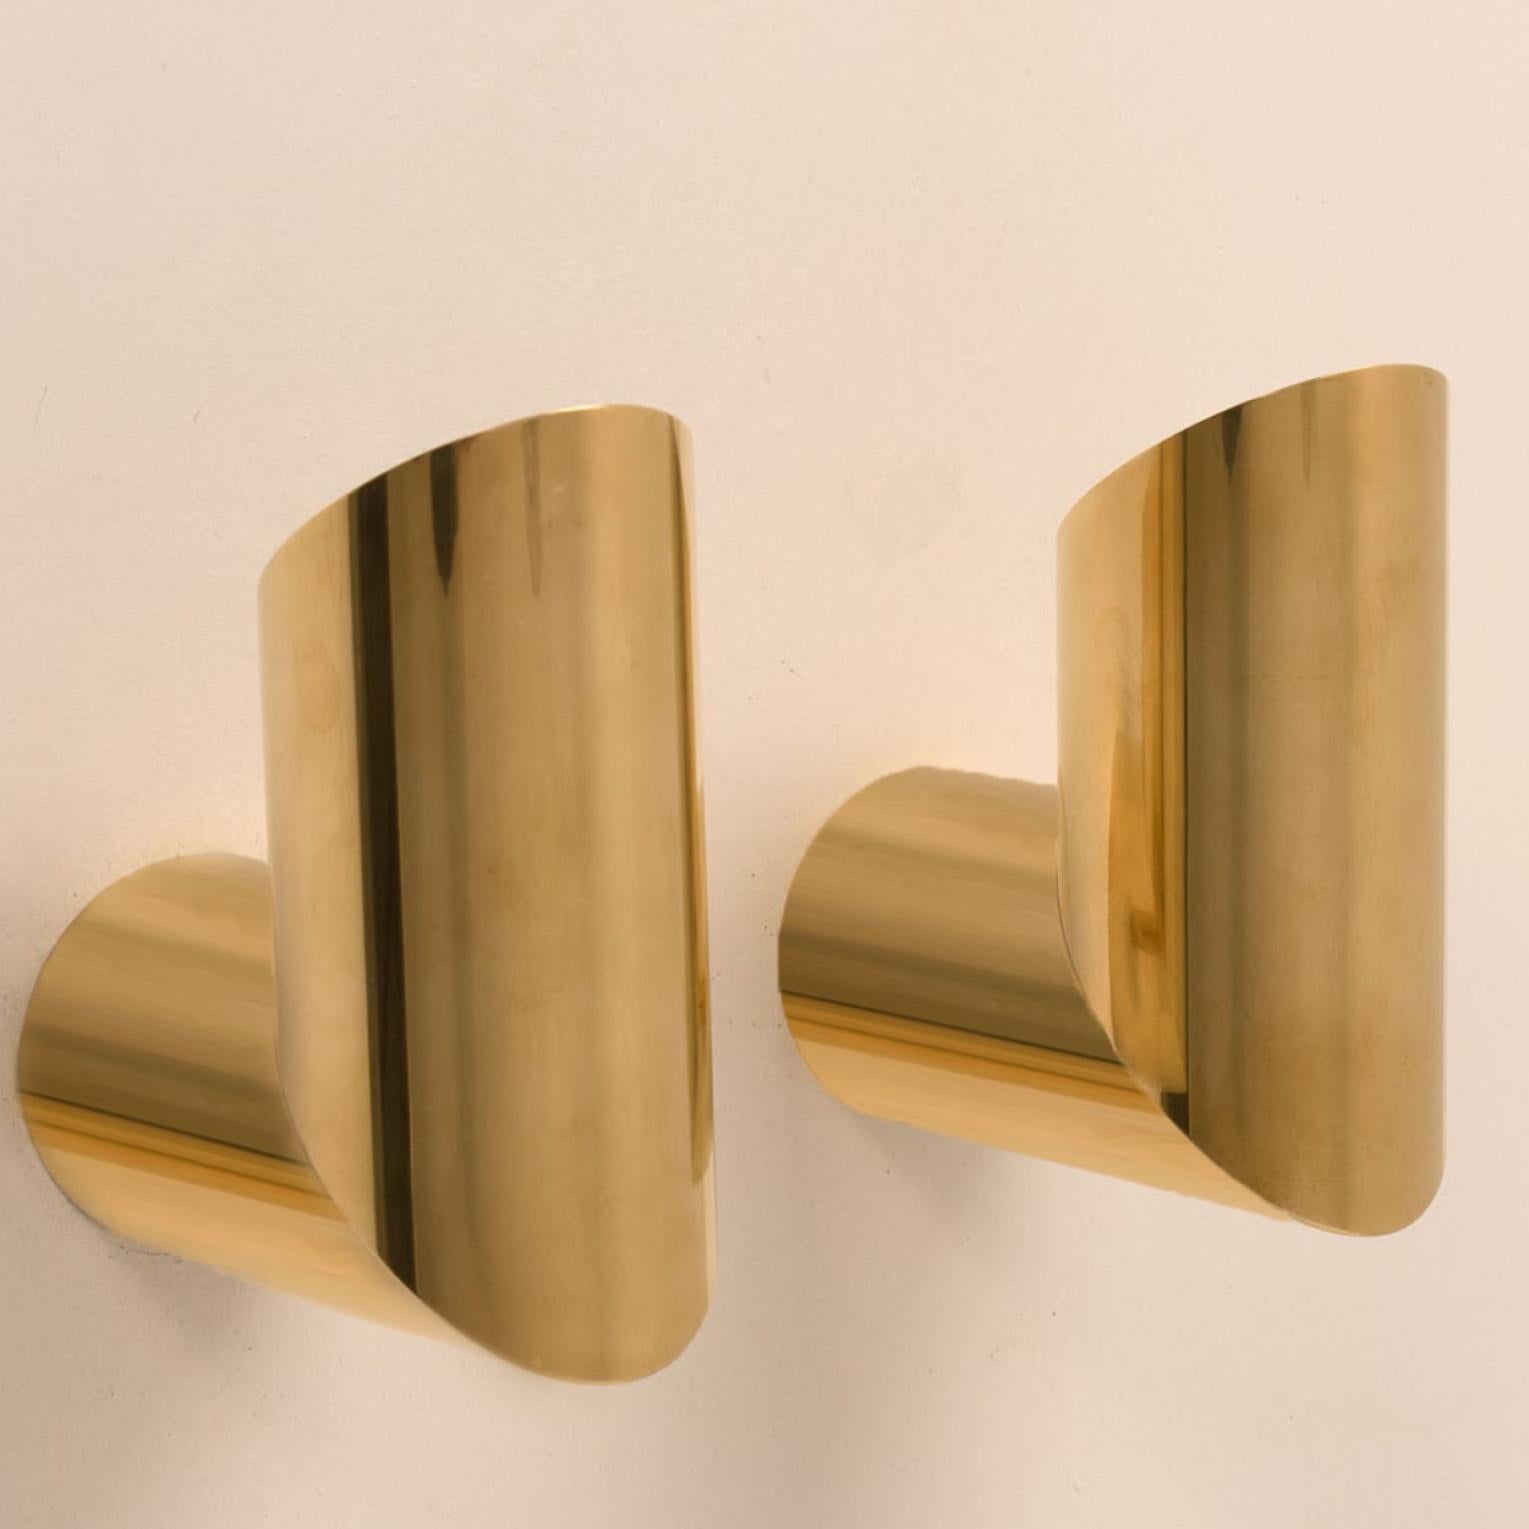 Late 20th Century 1 of the 8 Geometrical Brass Sconces in Two Sizes by Nanda Vigo for Arredoluce For Sale